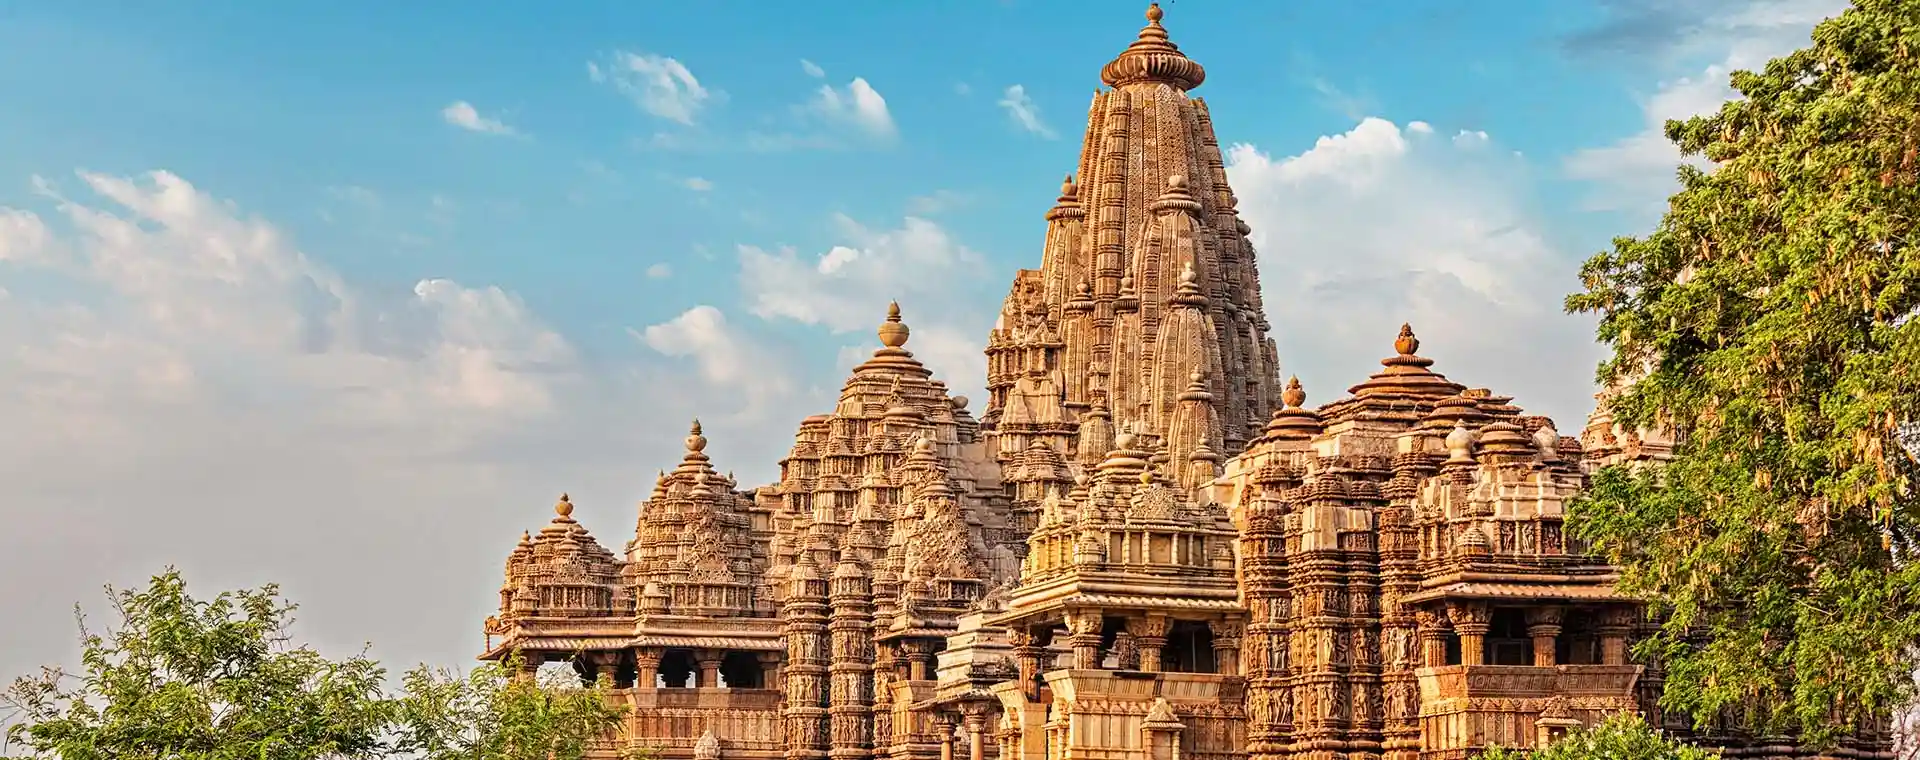 Top 10 Things to do in Khajuraho